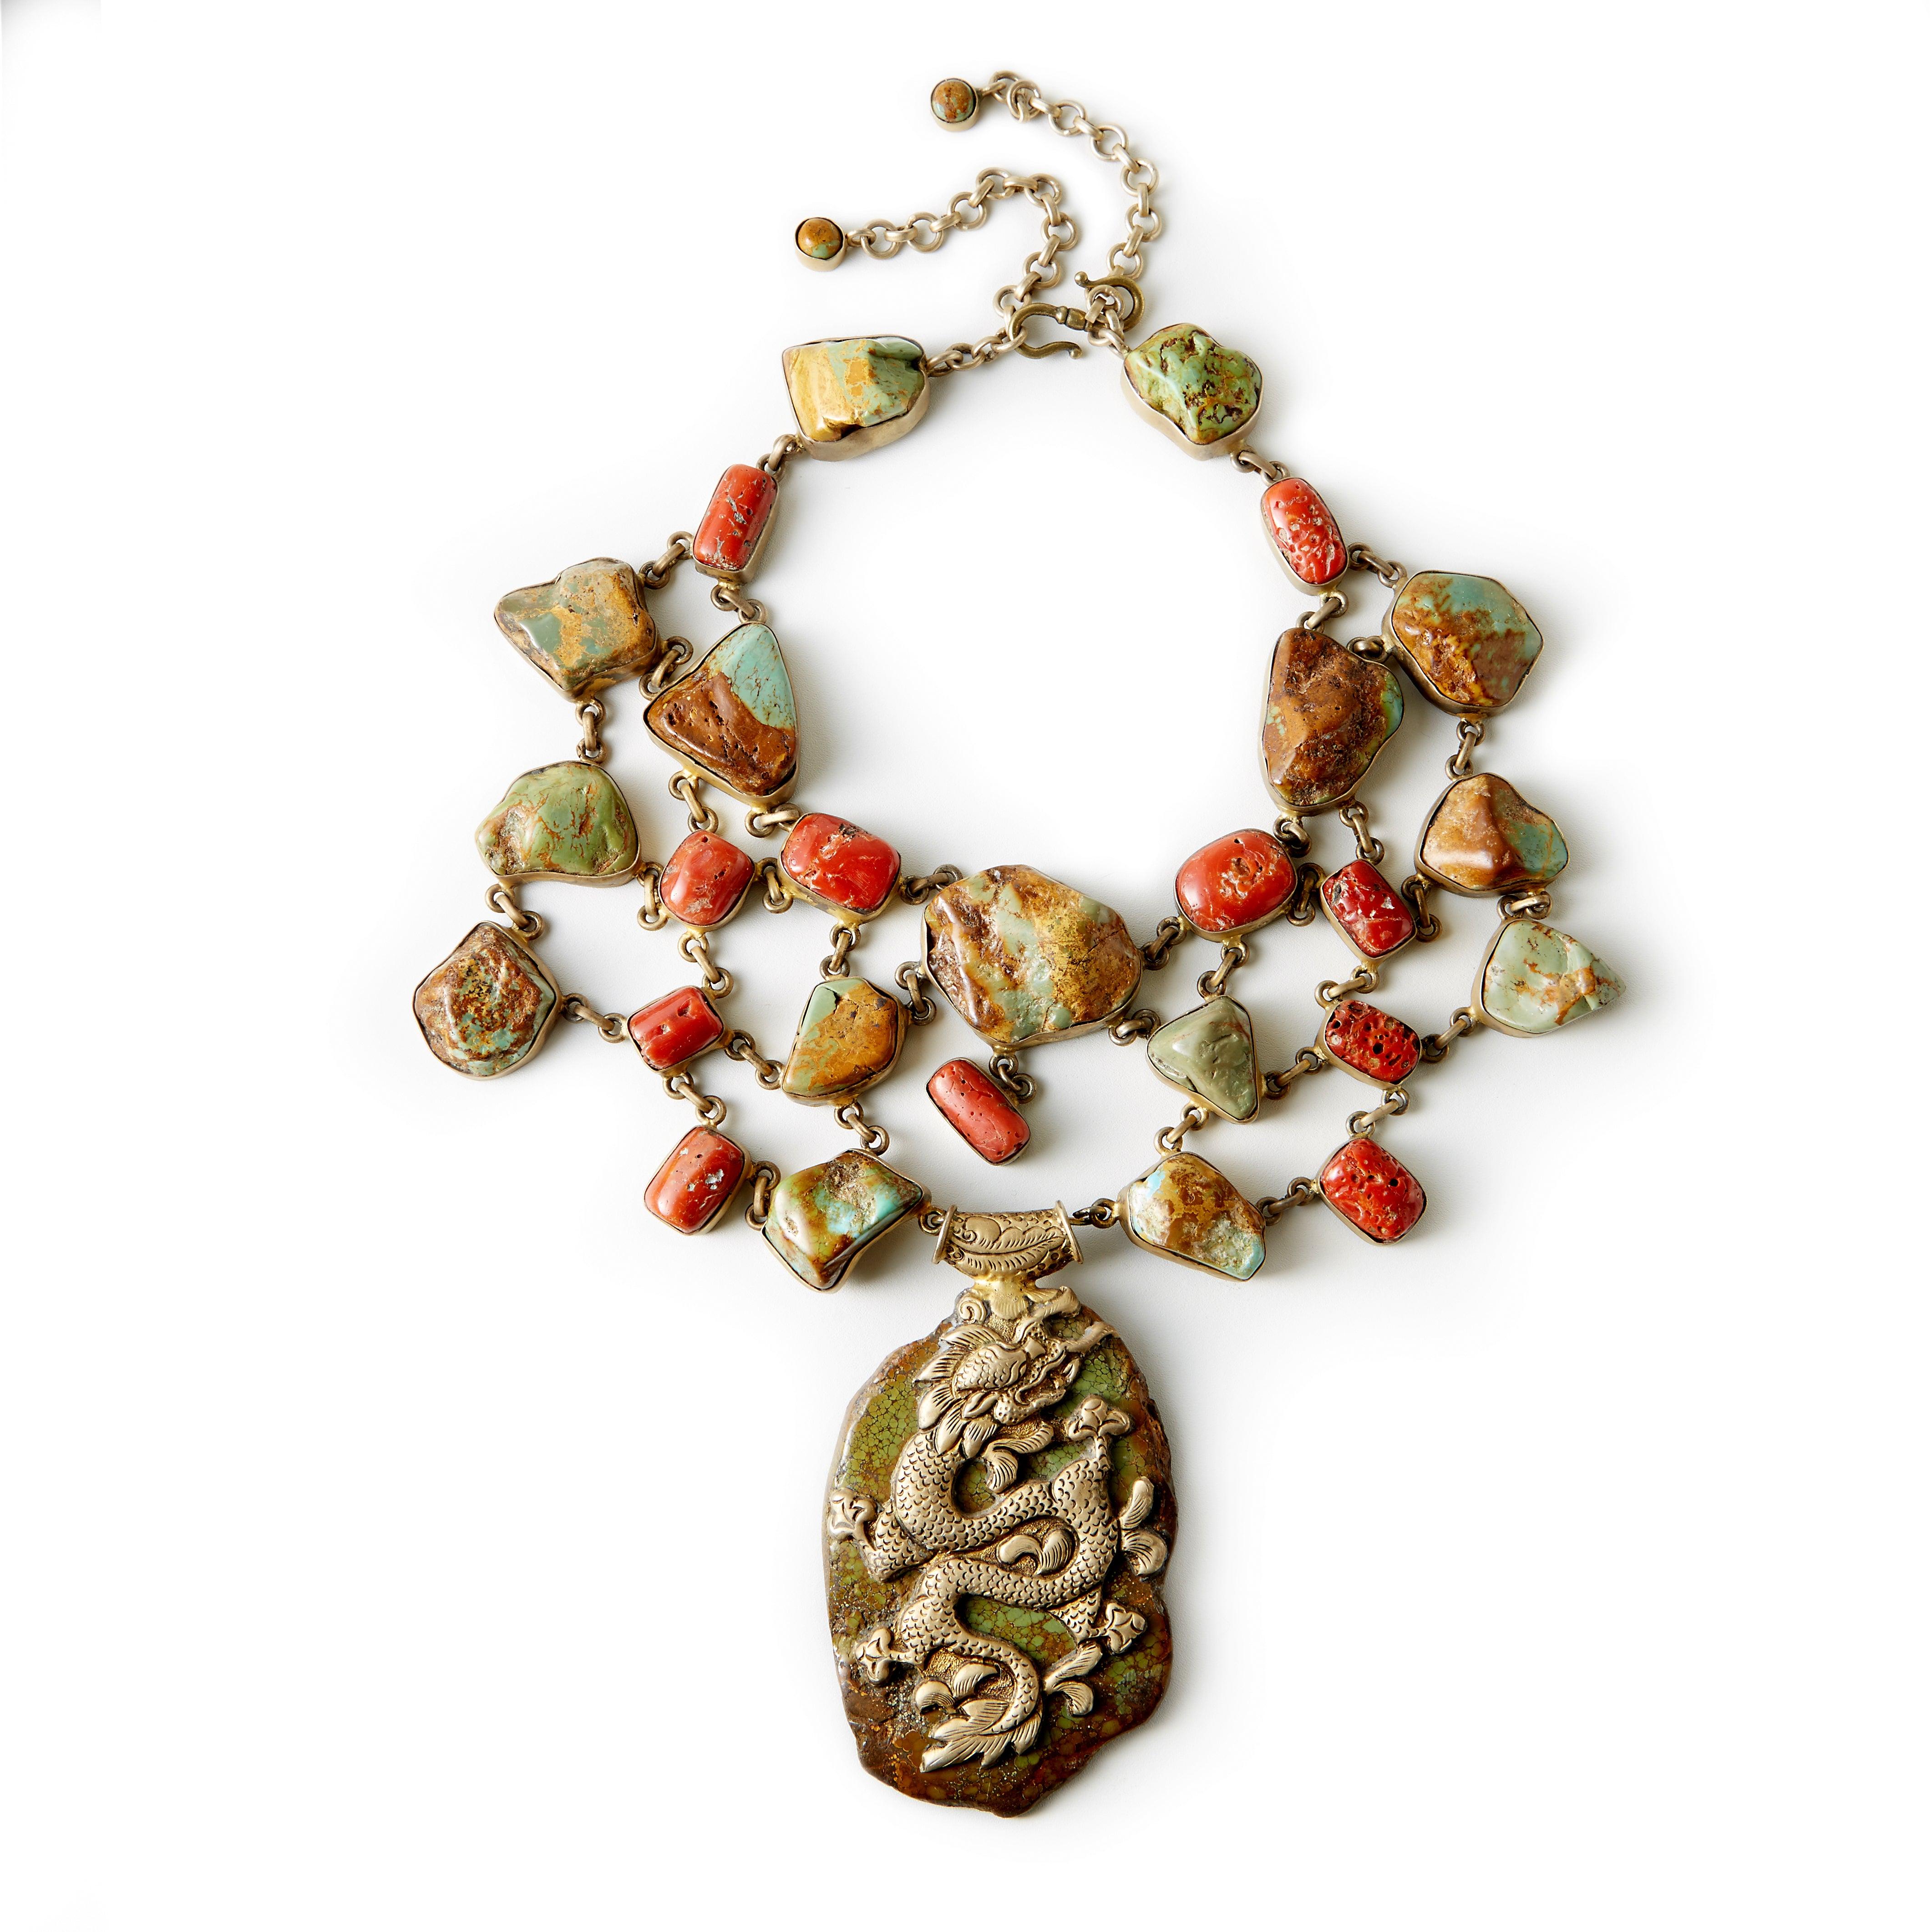 I adore this piece! It is sooo interesting - it really makes a statement! Tibetan Green Turquoise & Coral on a silver-gilt flexible necklace. As large as it is, it is easy to wear. Simply wonderful with jeans or as you can see Melora Hardin wears it